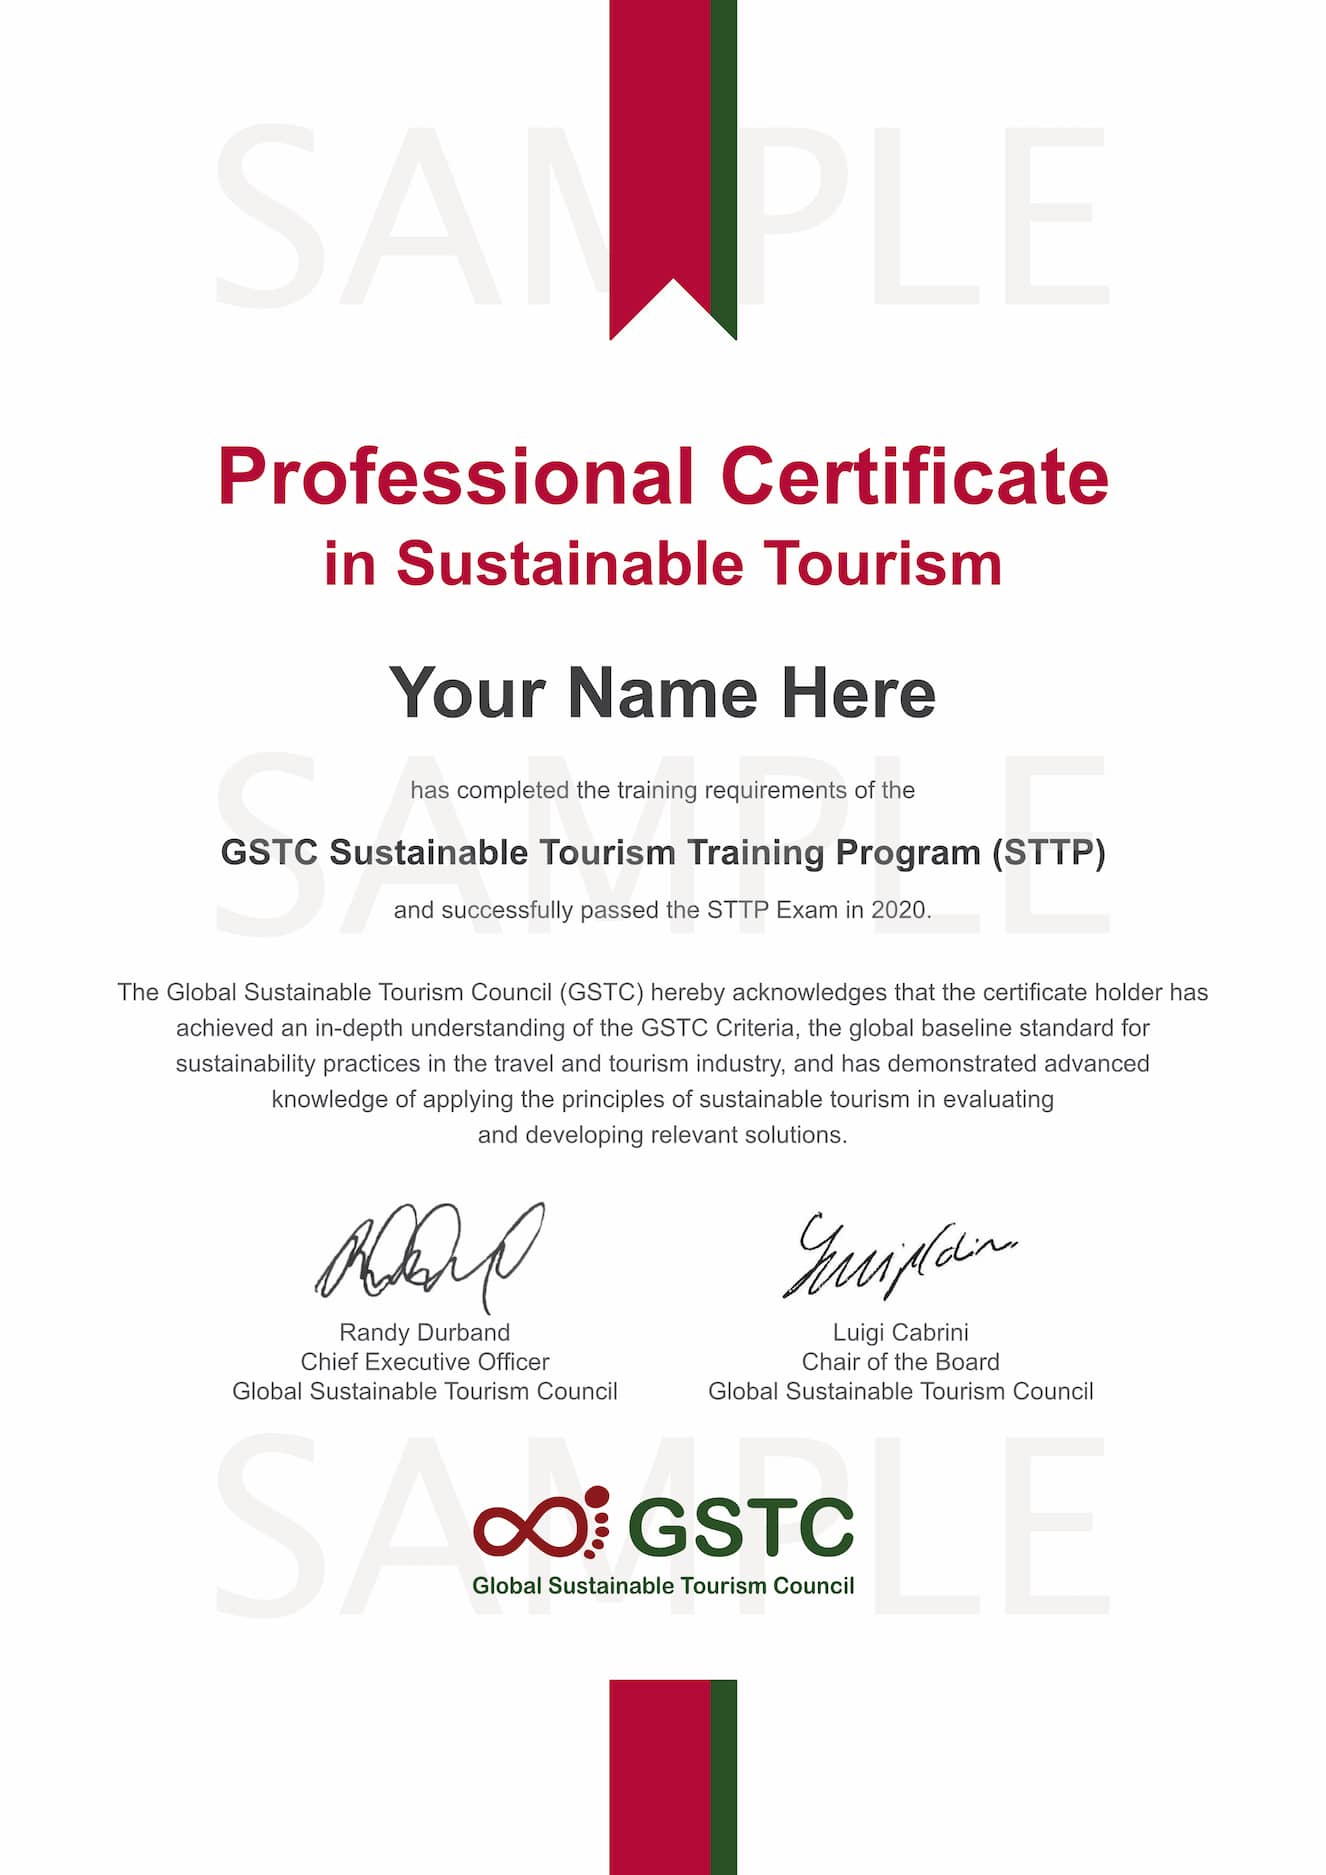 Professional Certificate in Sustainable Tourism Global Sustainable